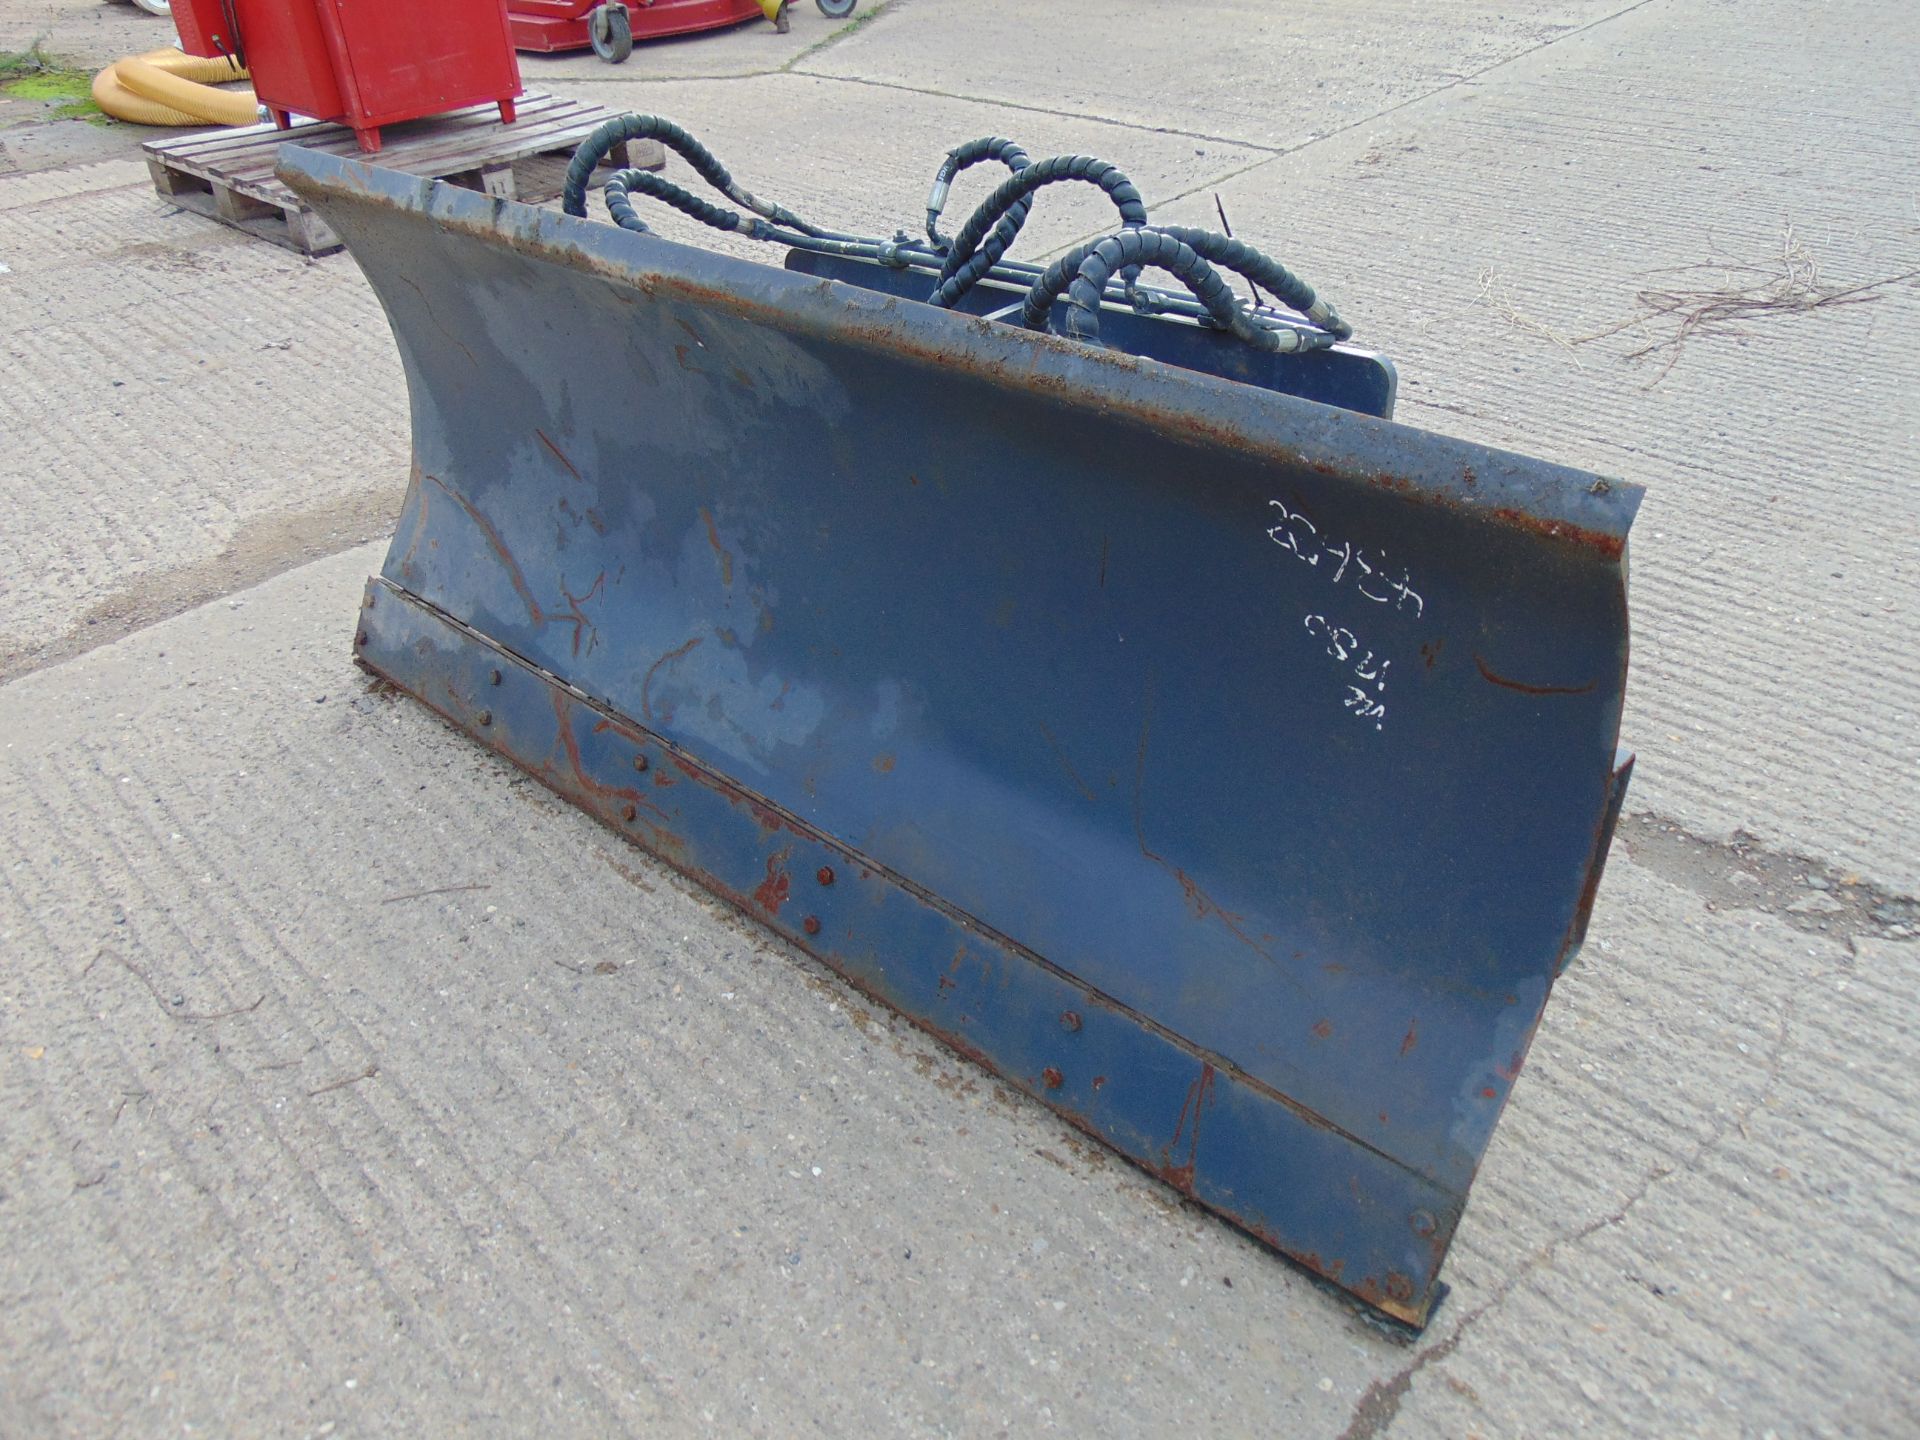 6' Hydraulic Snow Plough Blade for Telehandler, Forklift, Tractor Etc - Image 2 of 7